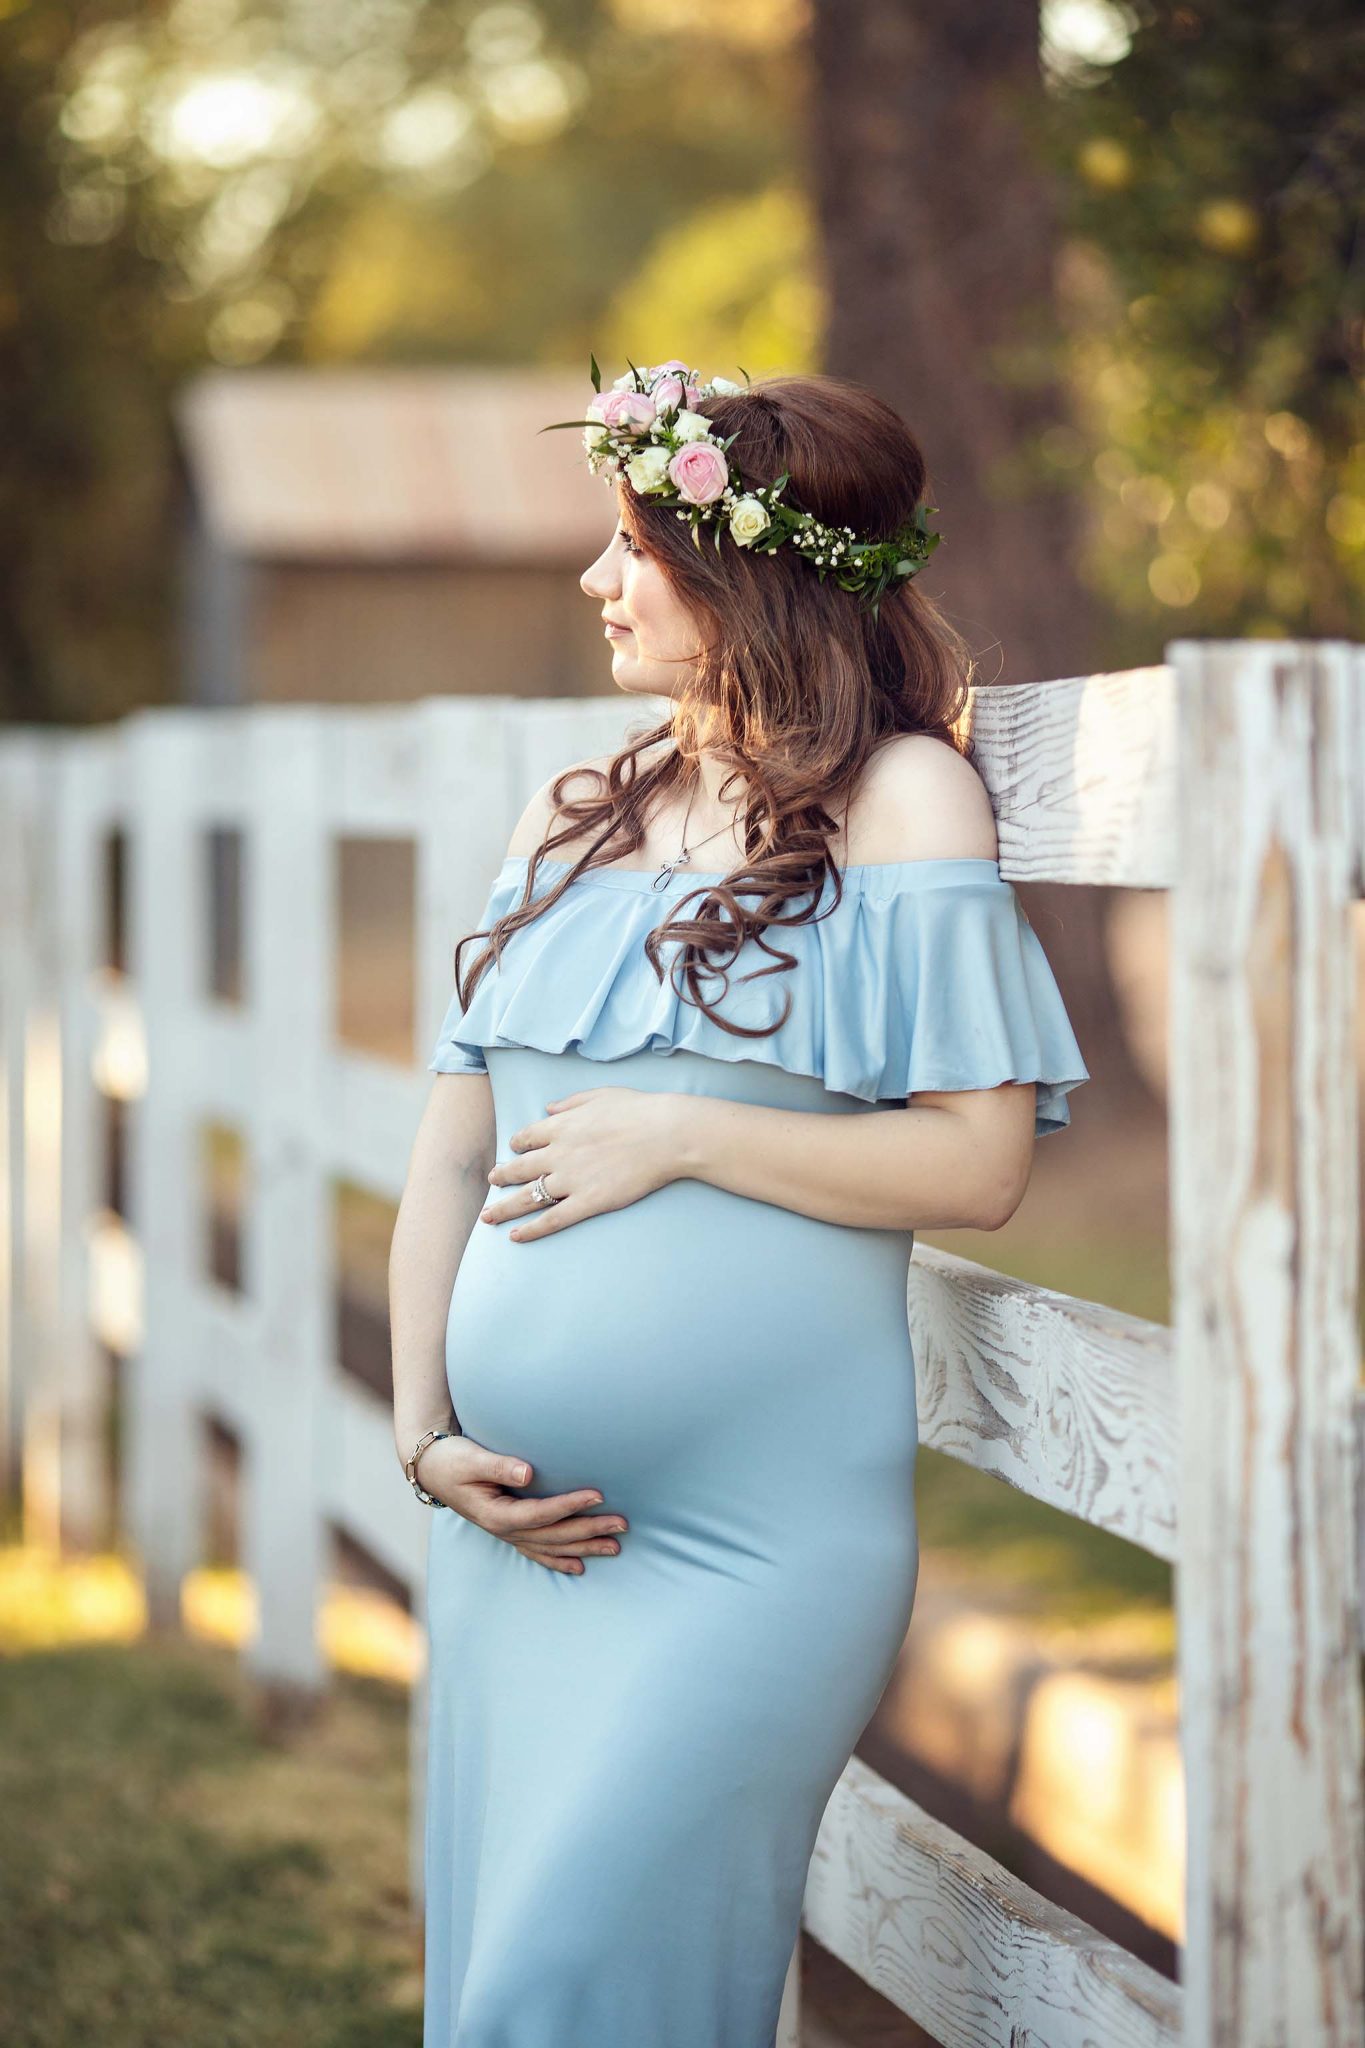 Maternity photography at Manistee Ranch Park in Glendale AZ